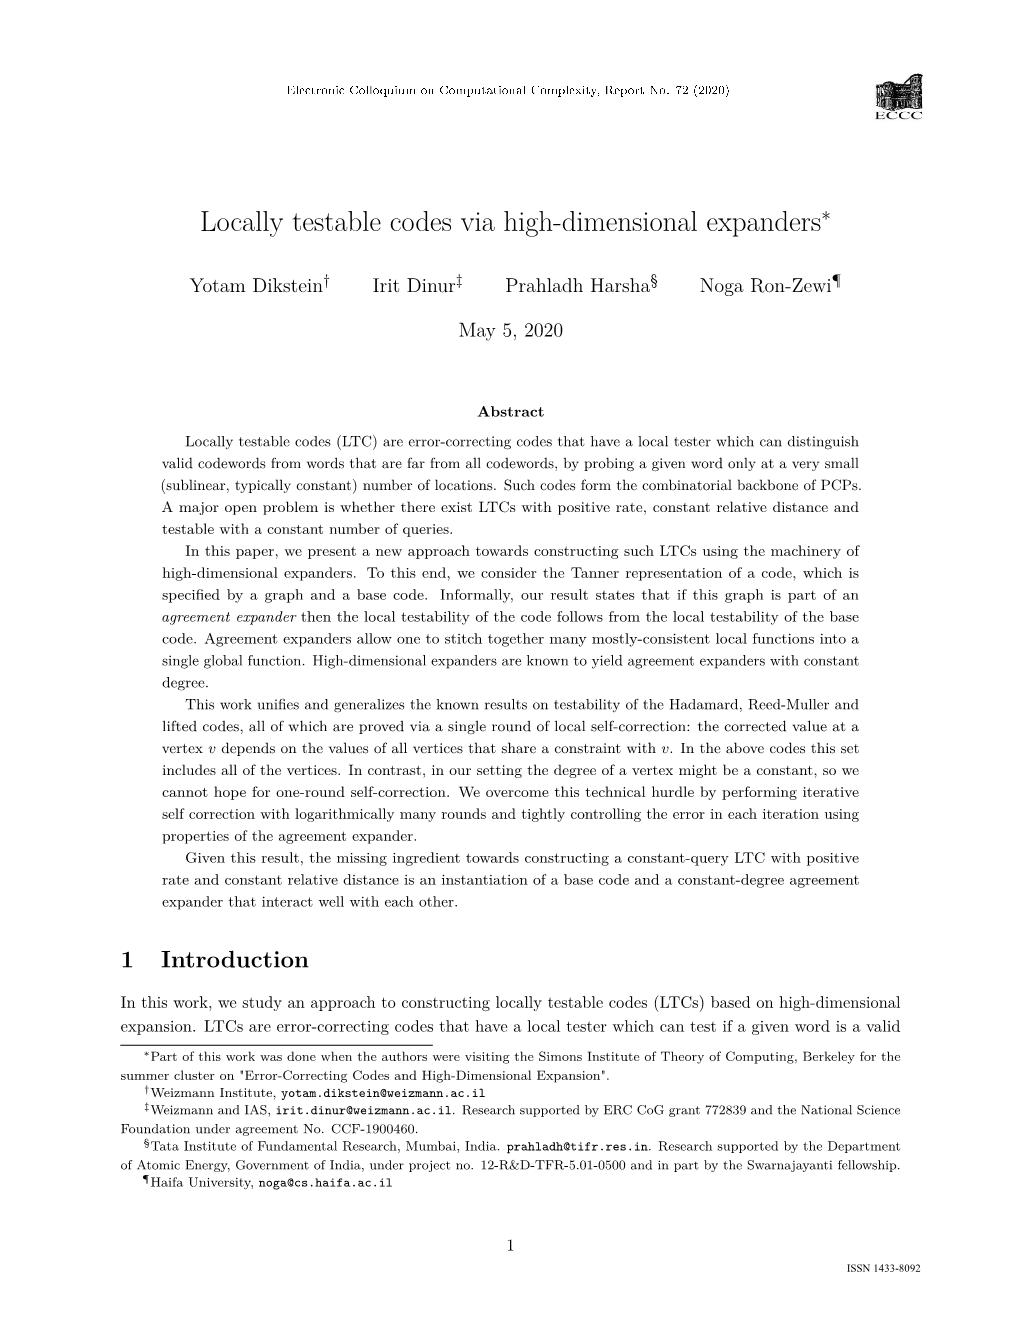 Locally Testable Codes Via High-Dimensional Expanders∗